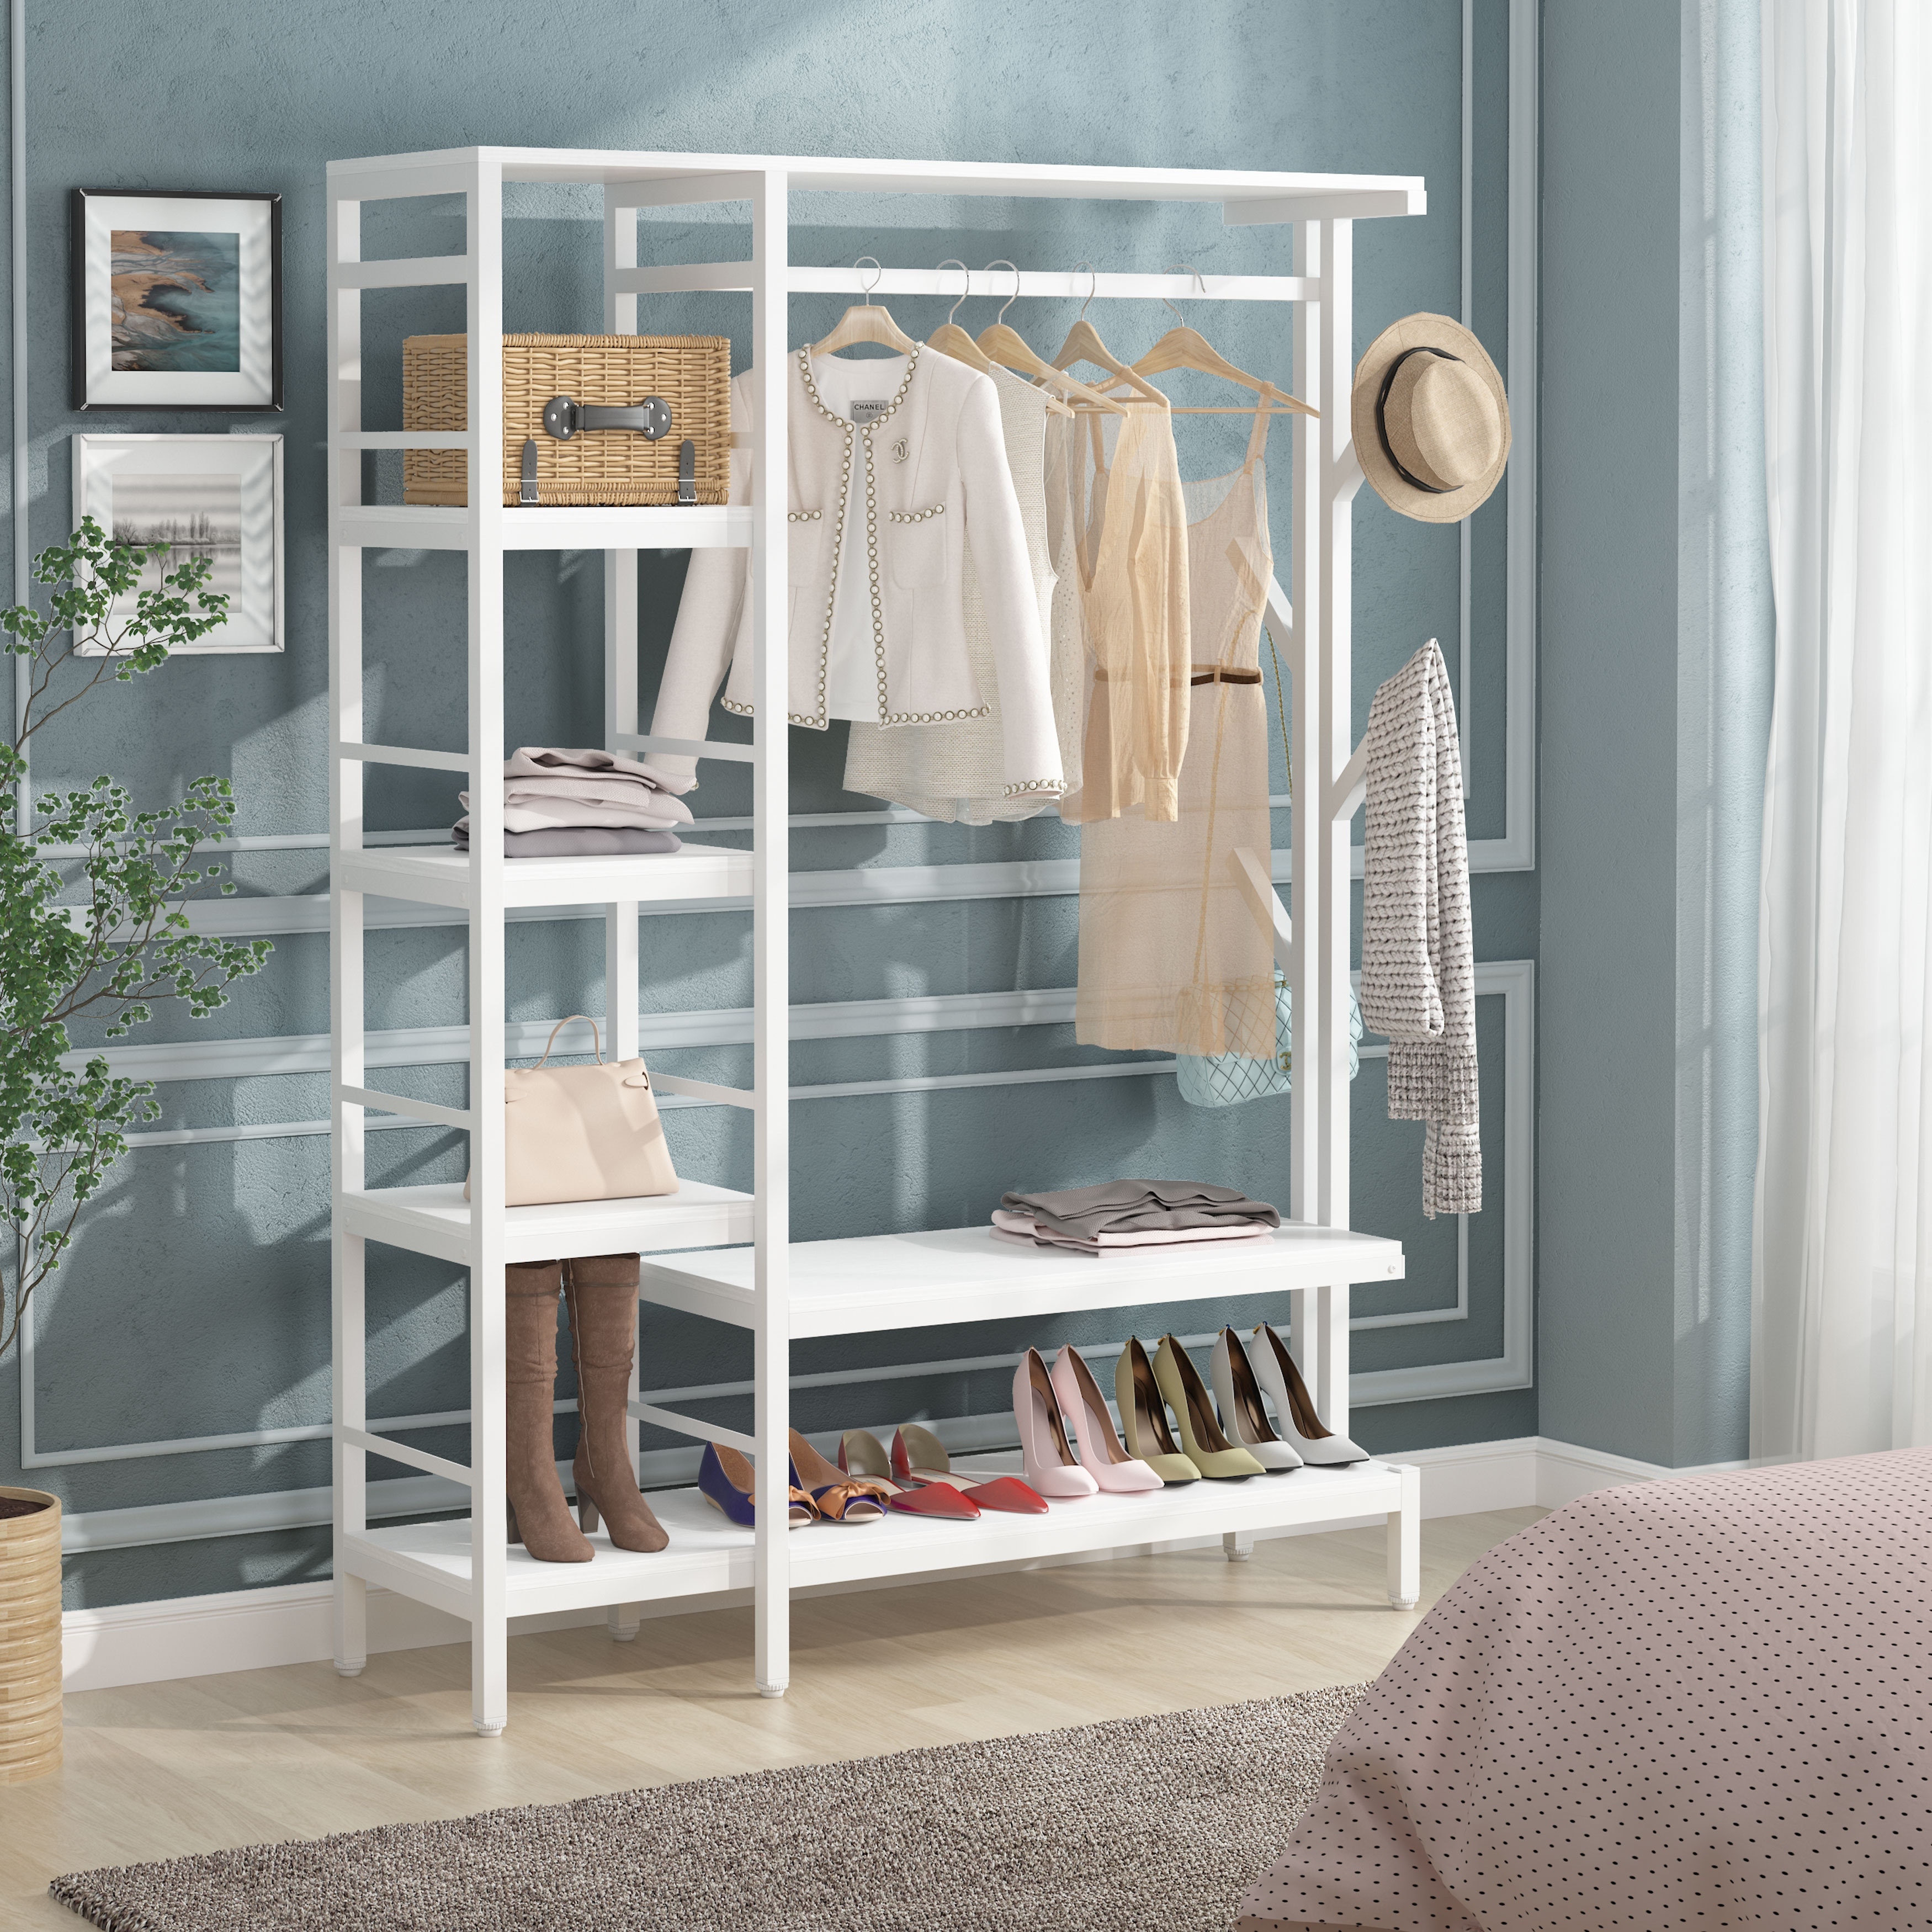 https://ak1.ostkcdn.com/images/products/is/images/direct/adc8c32ac48e3303cd3072b41dc0779cbbae24af/Free-Standing-Closet-Organizer-with-Hooks-Garment-Rack-with-Shelves-and-Hanging-Rod.jpg